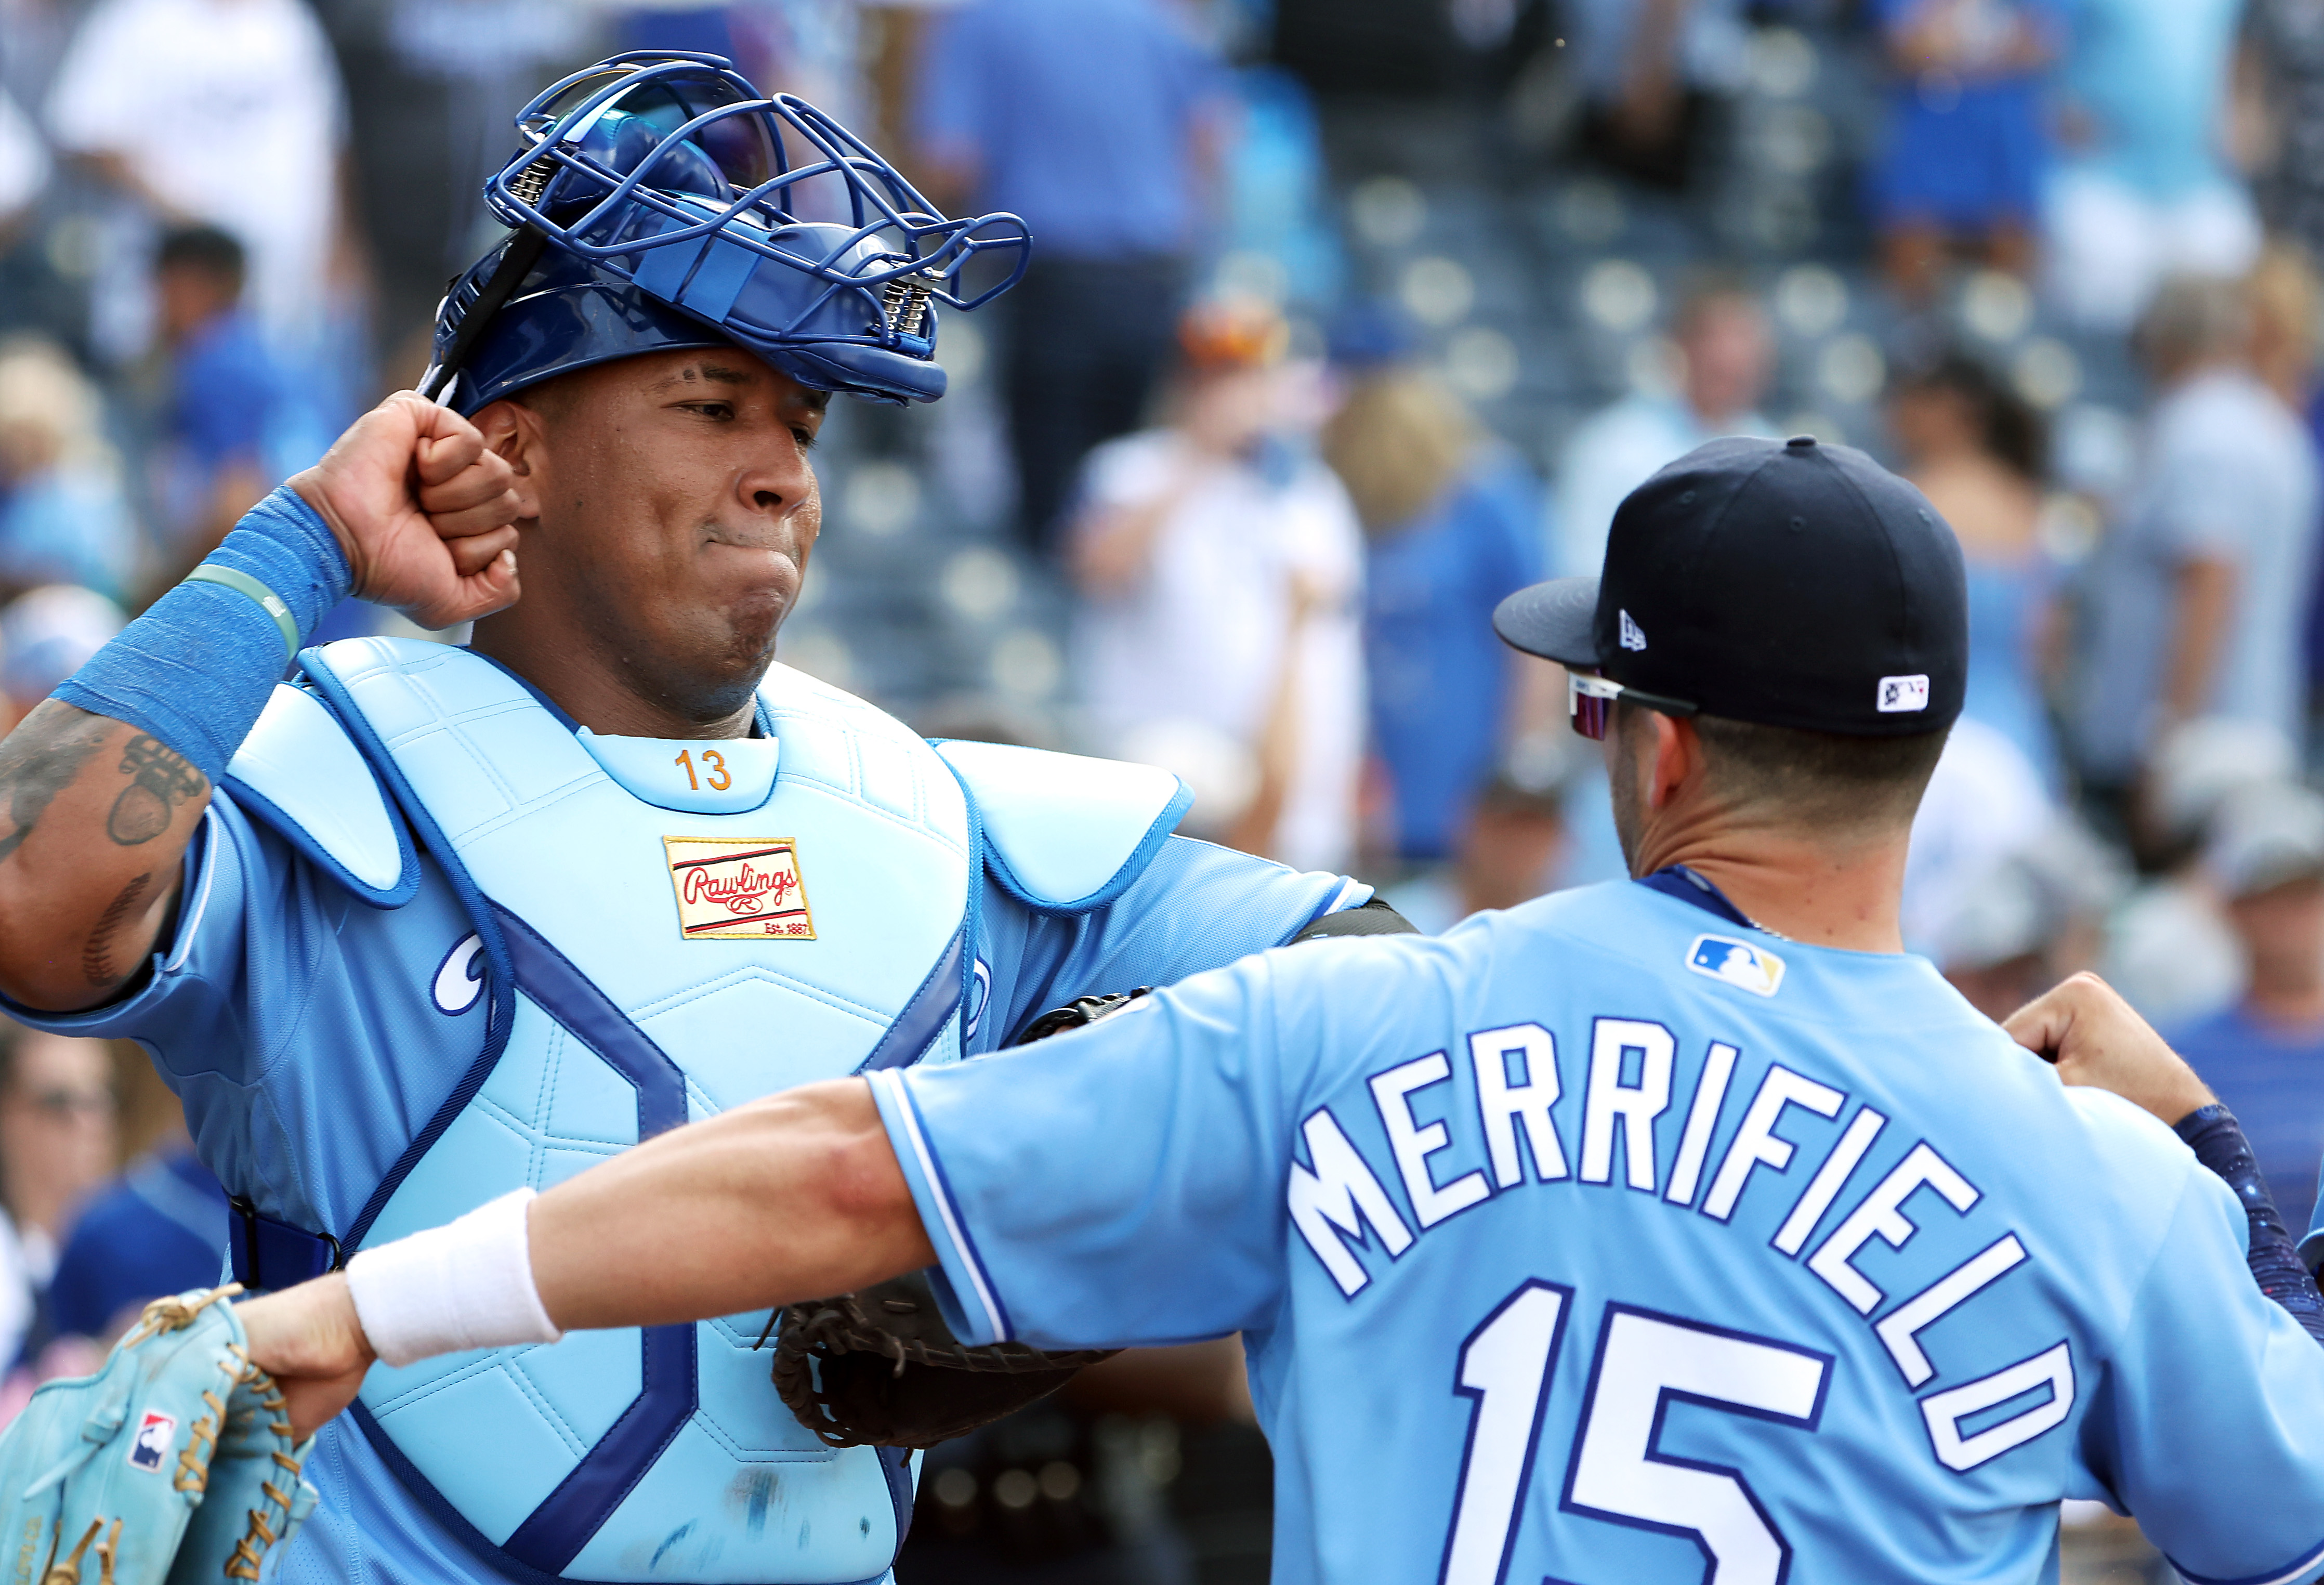 Whit Merrifield shows Kansas City Royals need complete reset